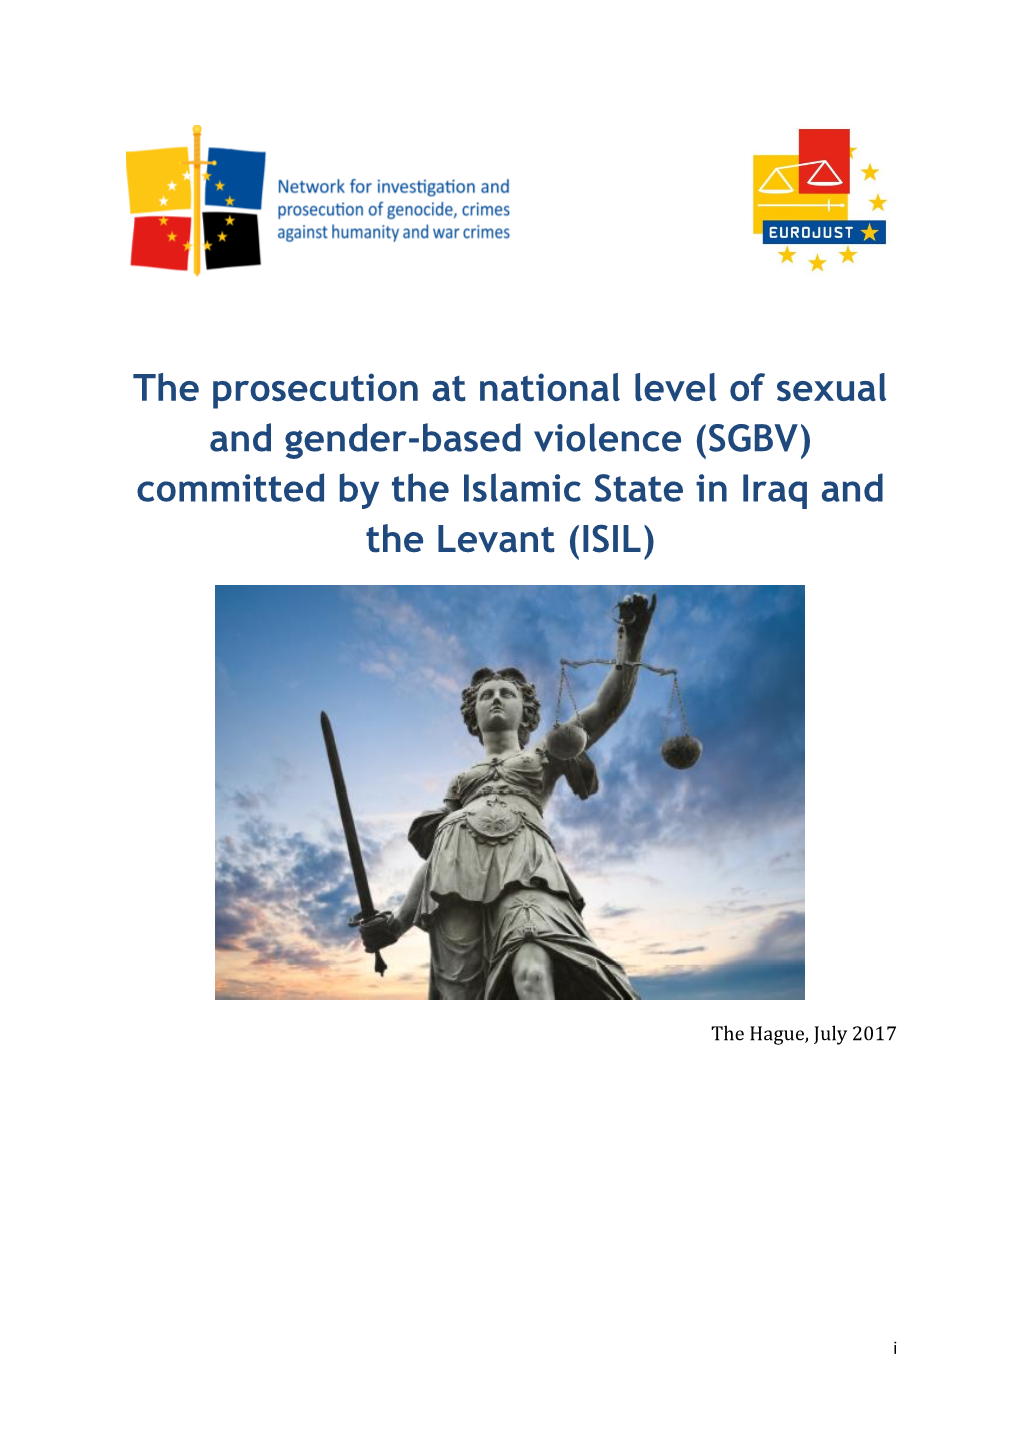 The Prosecution at National Level of Sexual and Gender-Based Violence (SGBV) Committed by the Islamic State in Iraq and the Levant (ISIL)